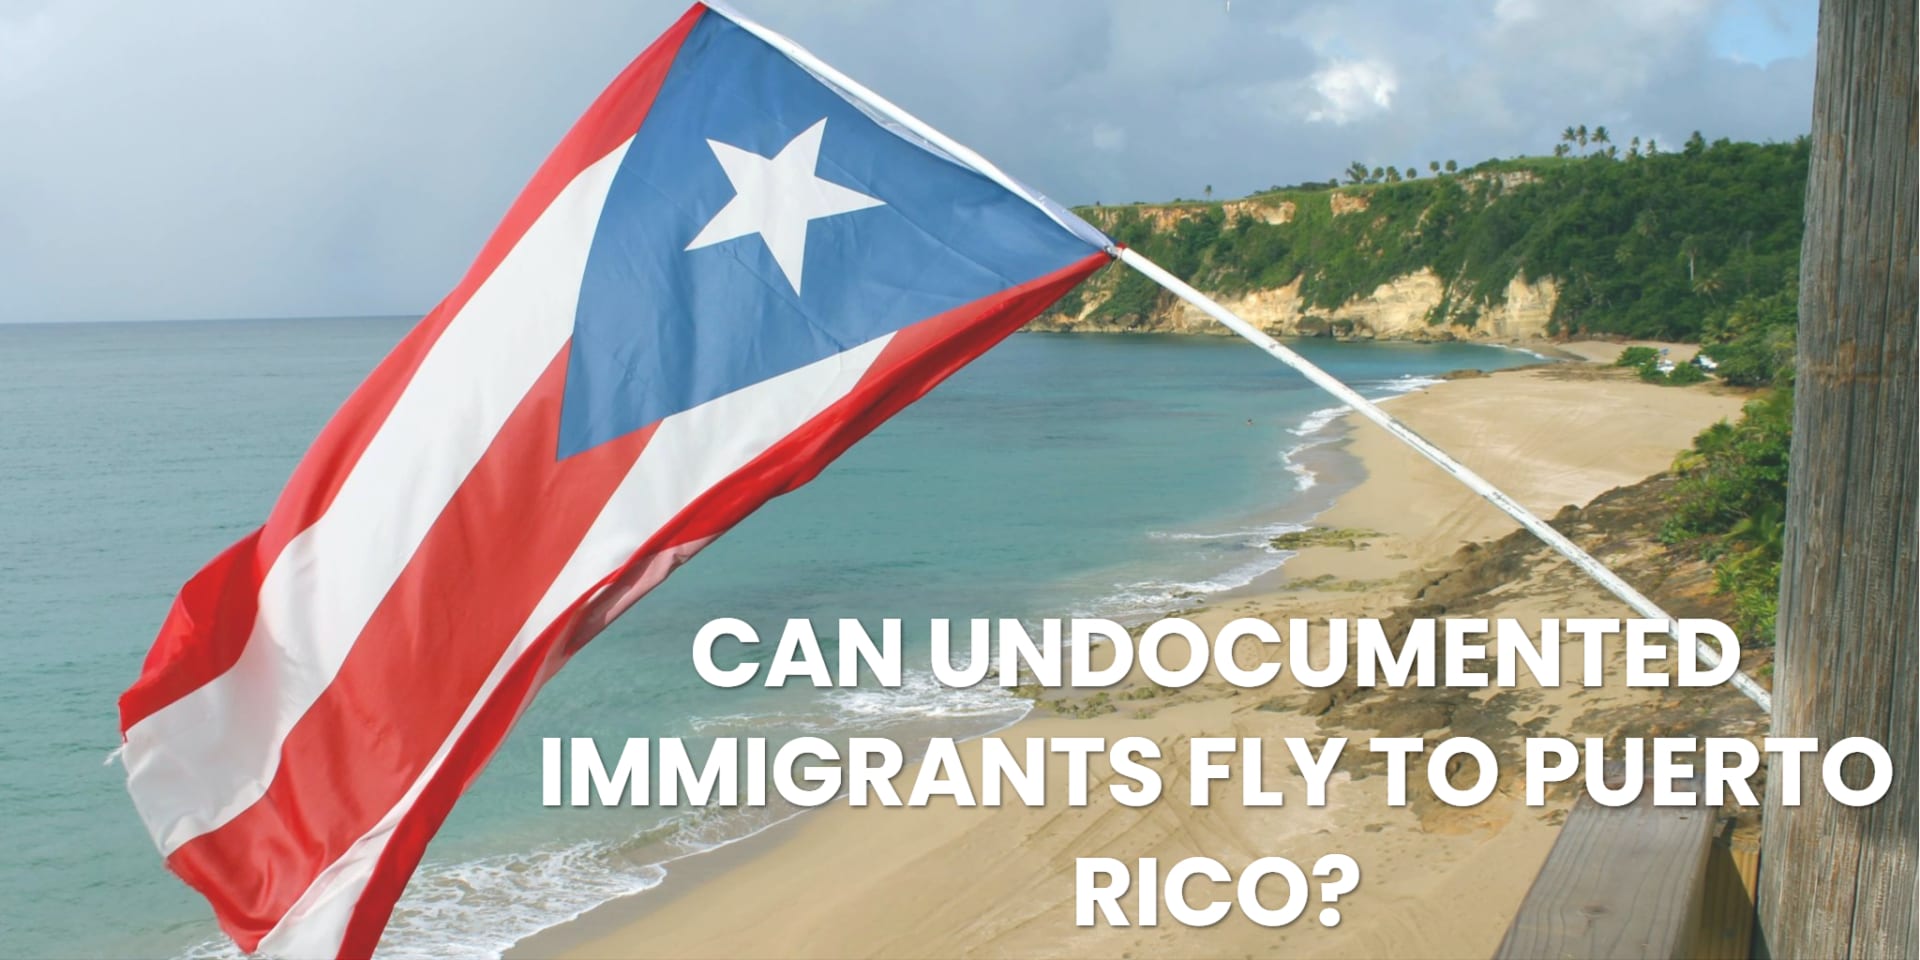 Can Undocumented Immigrants Fly to Puerto Rico?